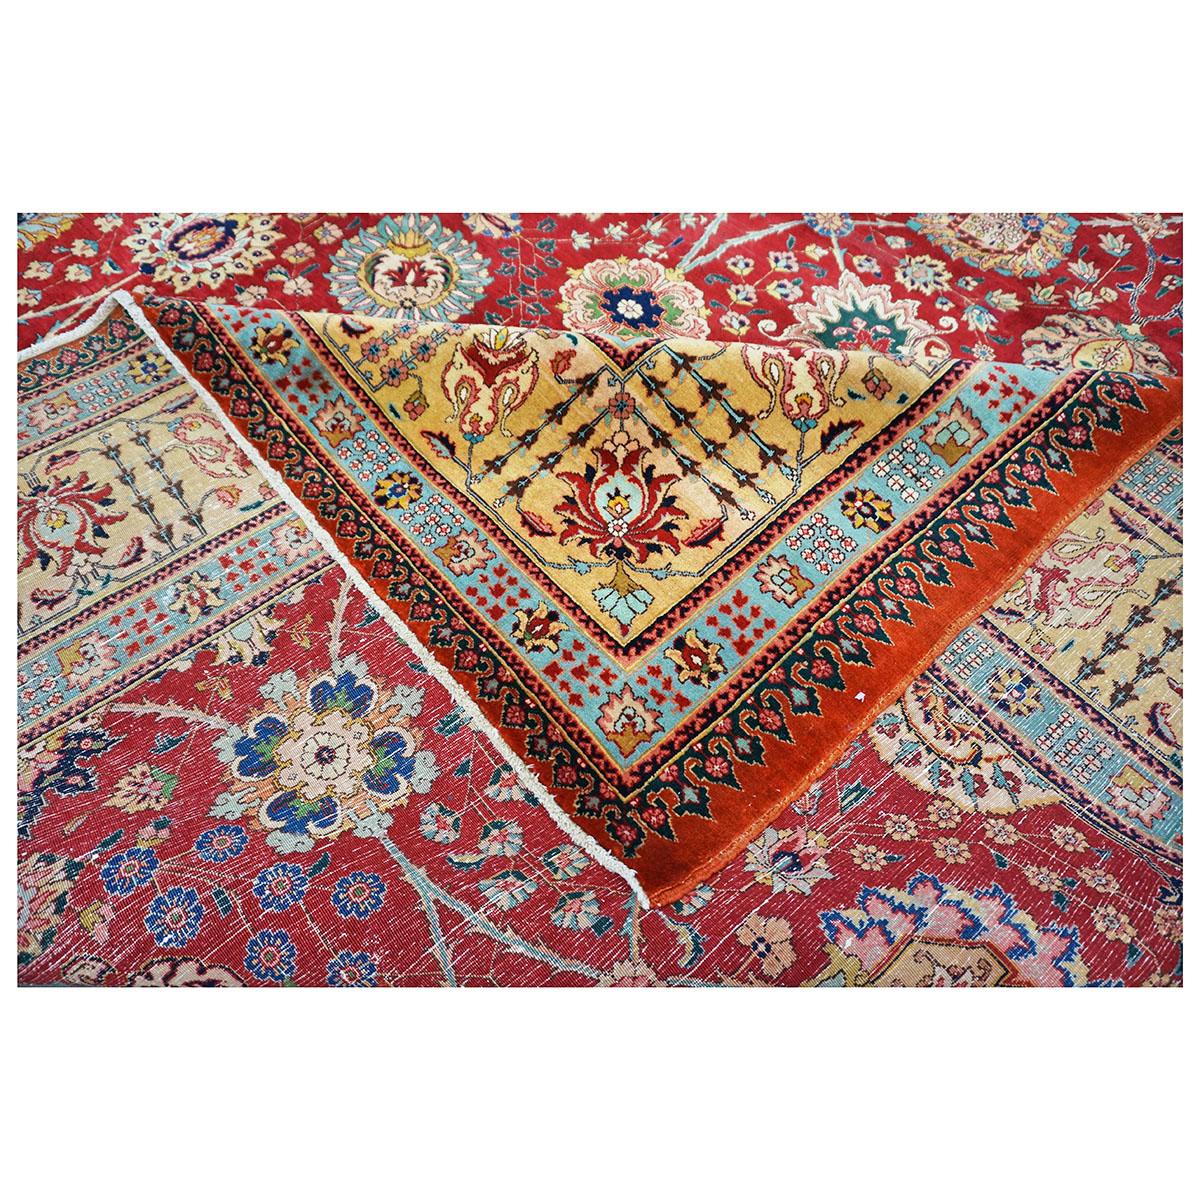 20th Century Antique Persian Tabriz Pahlavi 10x13 Red & Gold Handmade Area Rug For Sale 2